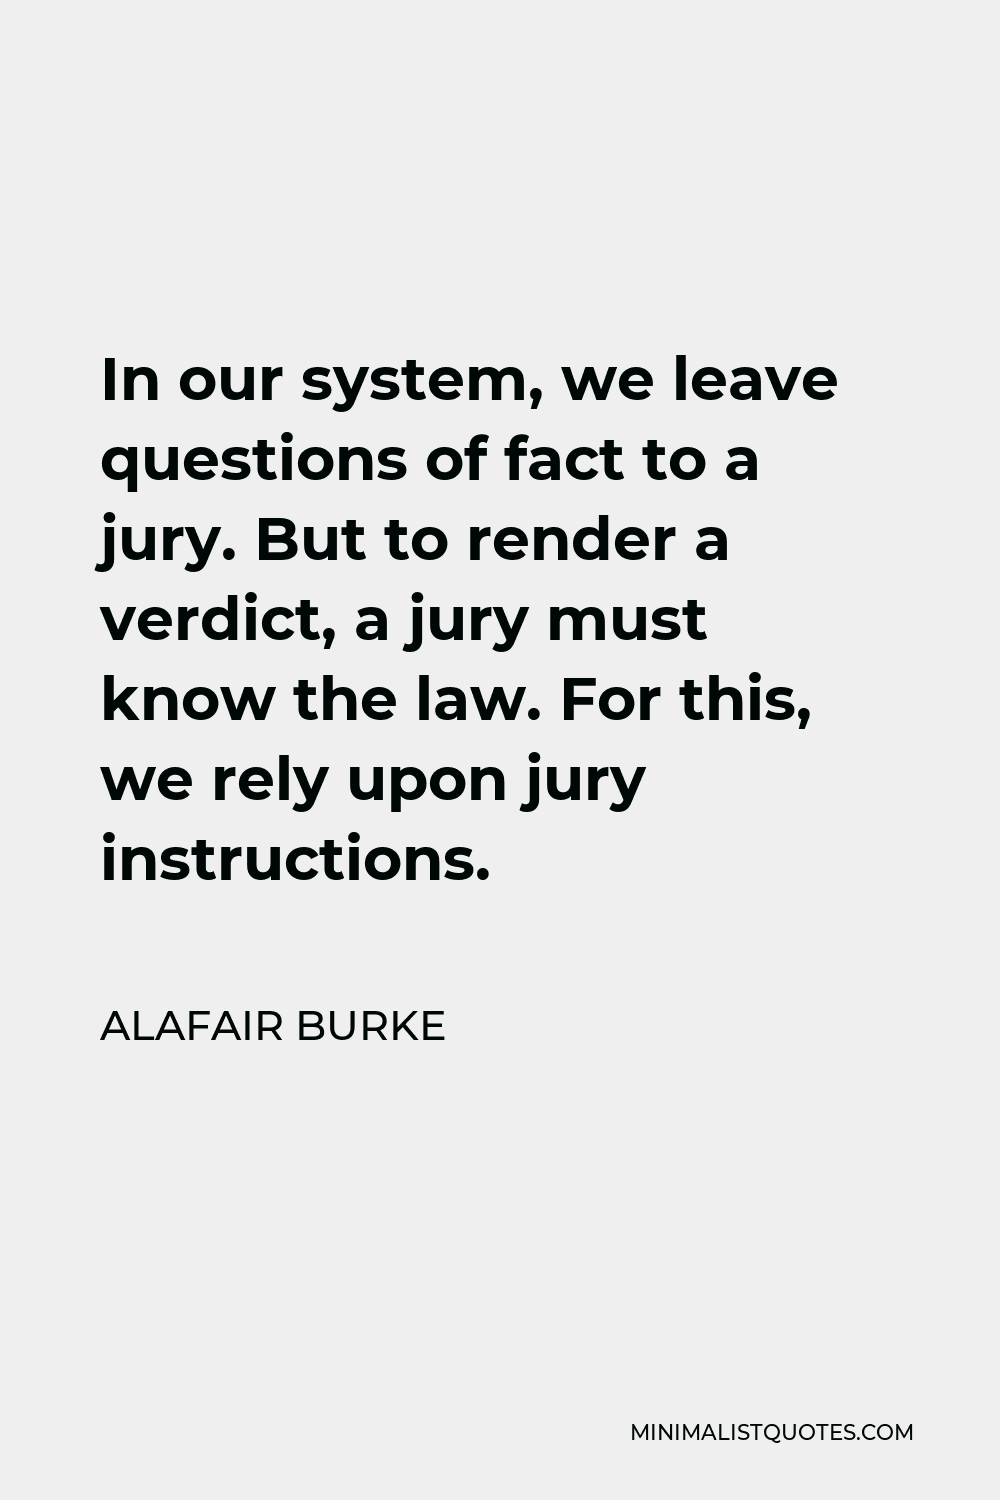 Alafair Burke Quote - In our system, we leave questions of fact to a jury. But to render a verdict, a jury must know the law. For this, we rely upon jury instructions.